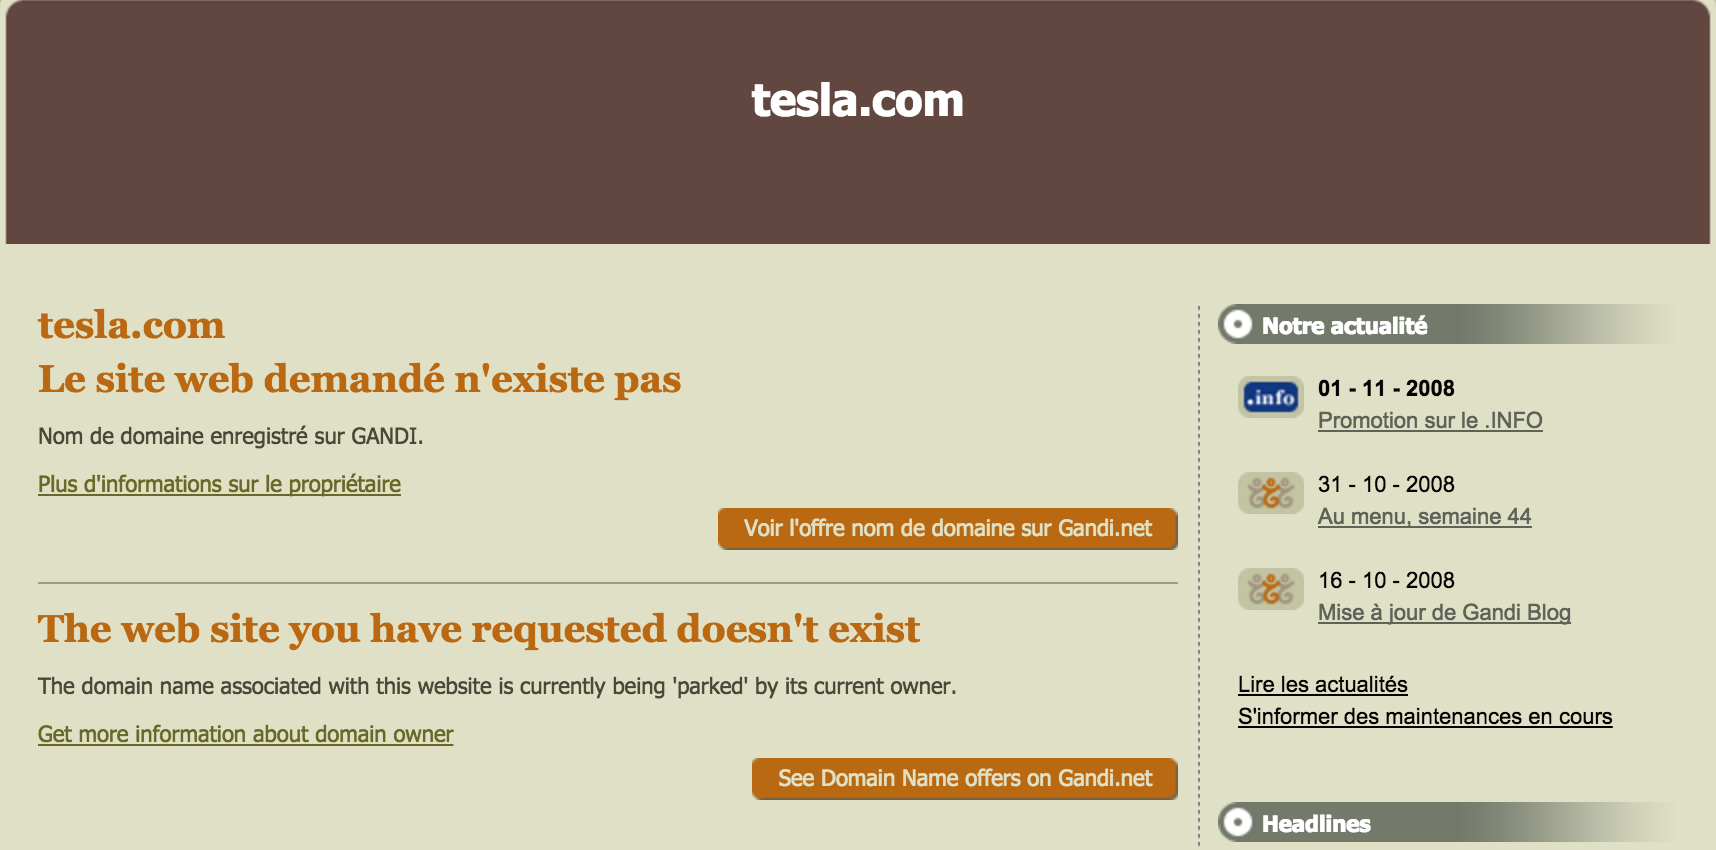 tesla finally acquired the tesla domain